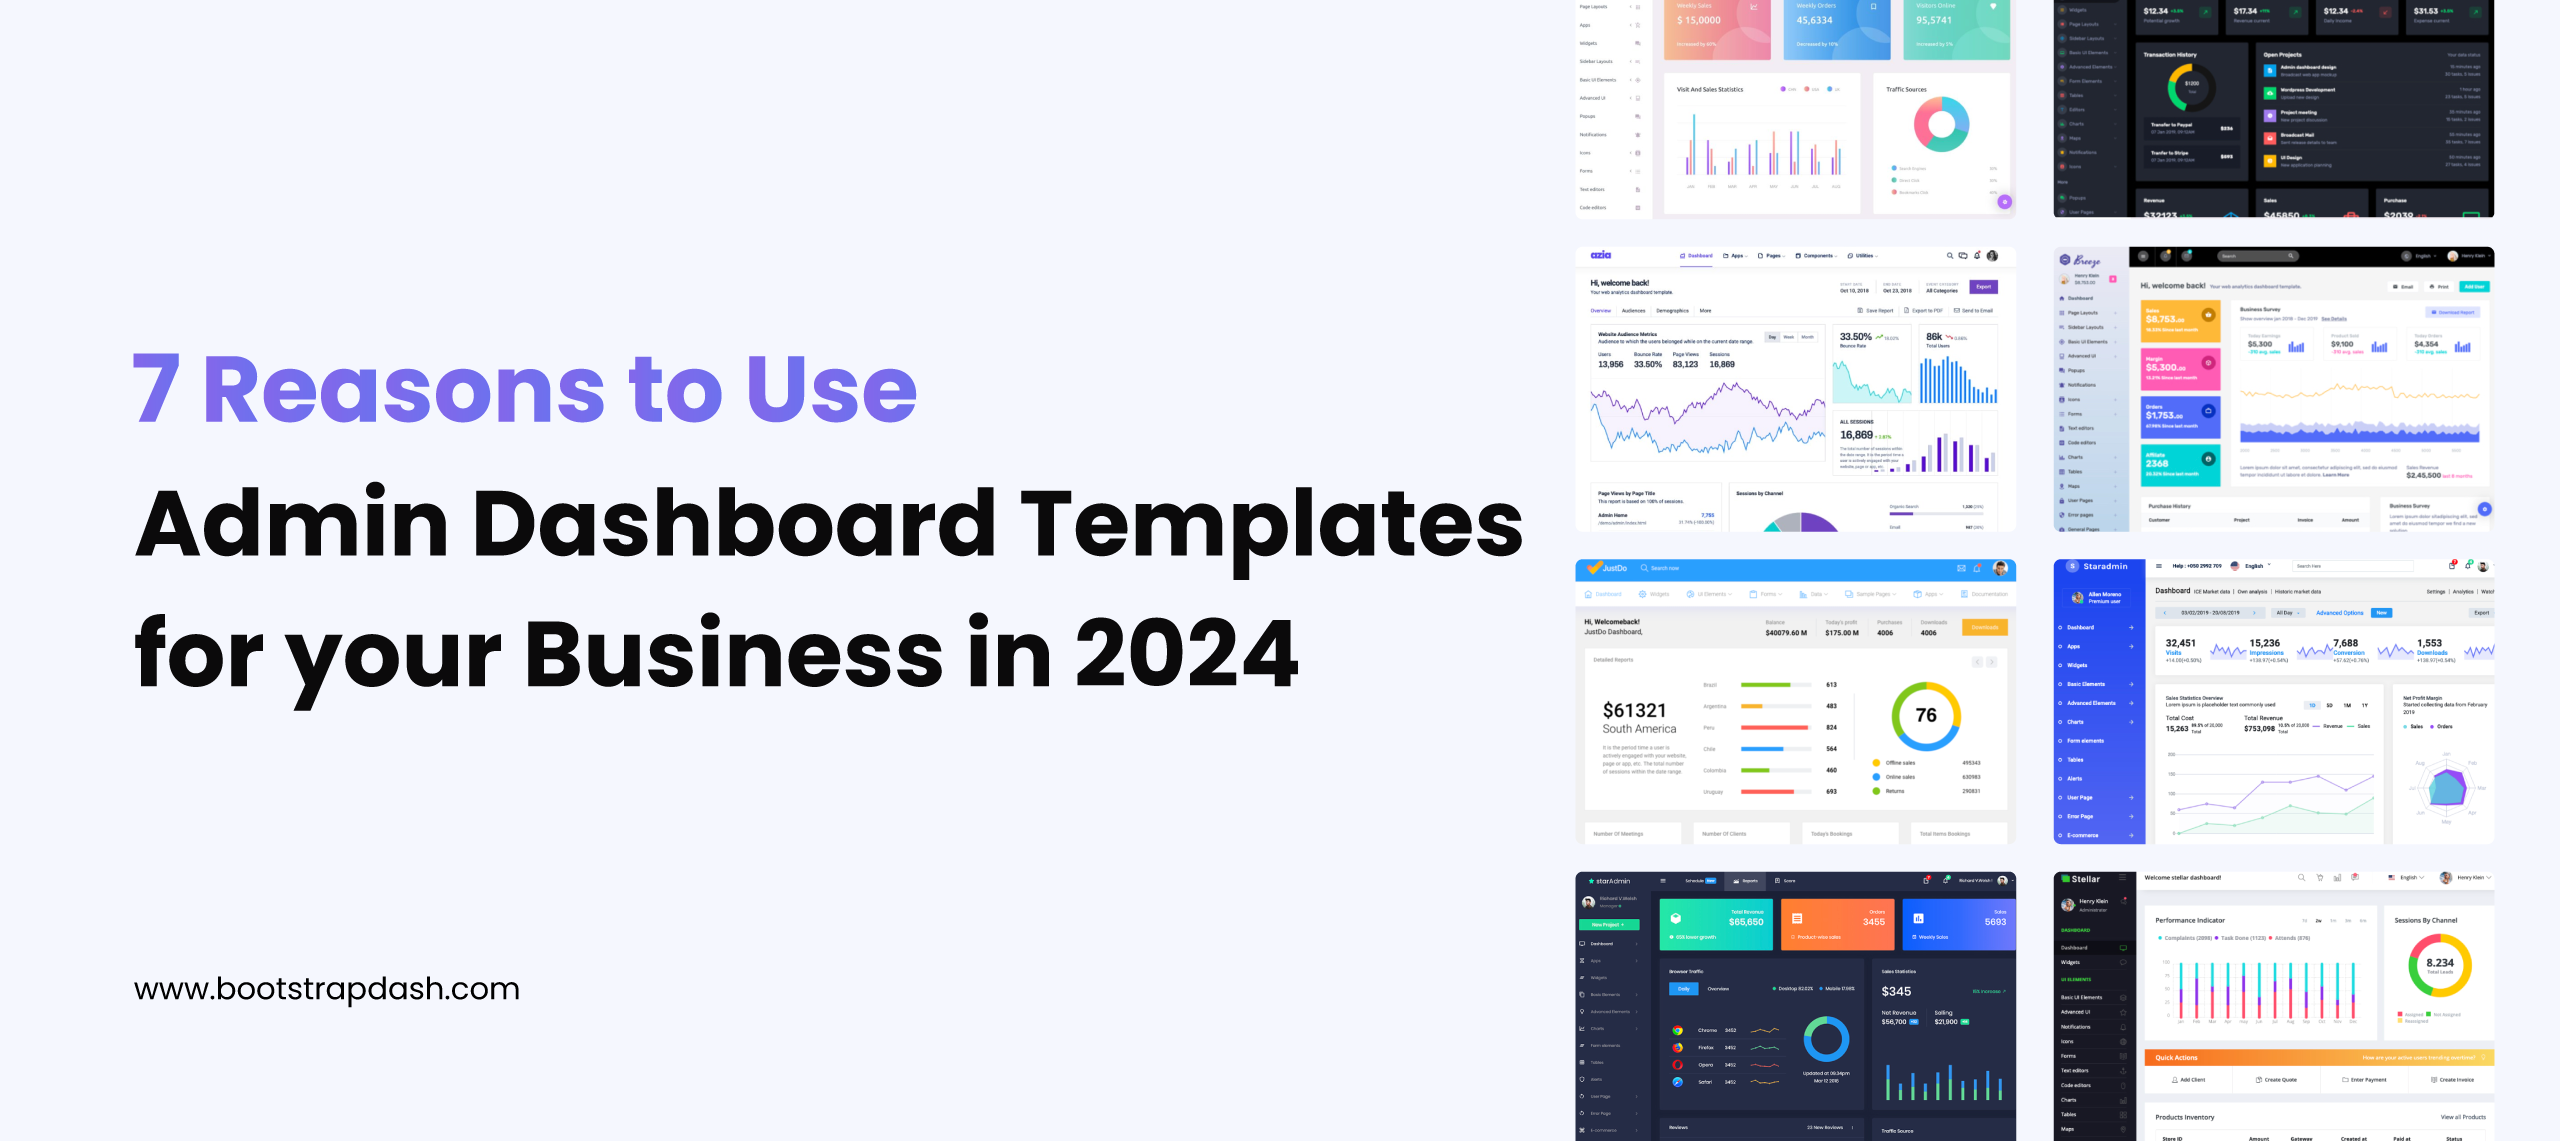  7 Reasons to Use Admin Dashboard Templates for your Business in 2024